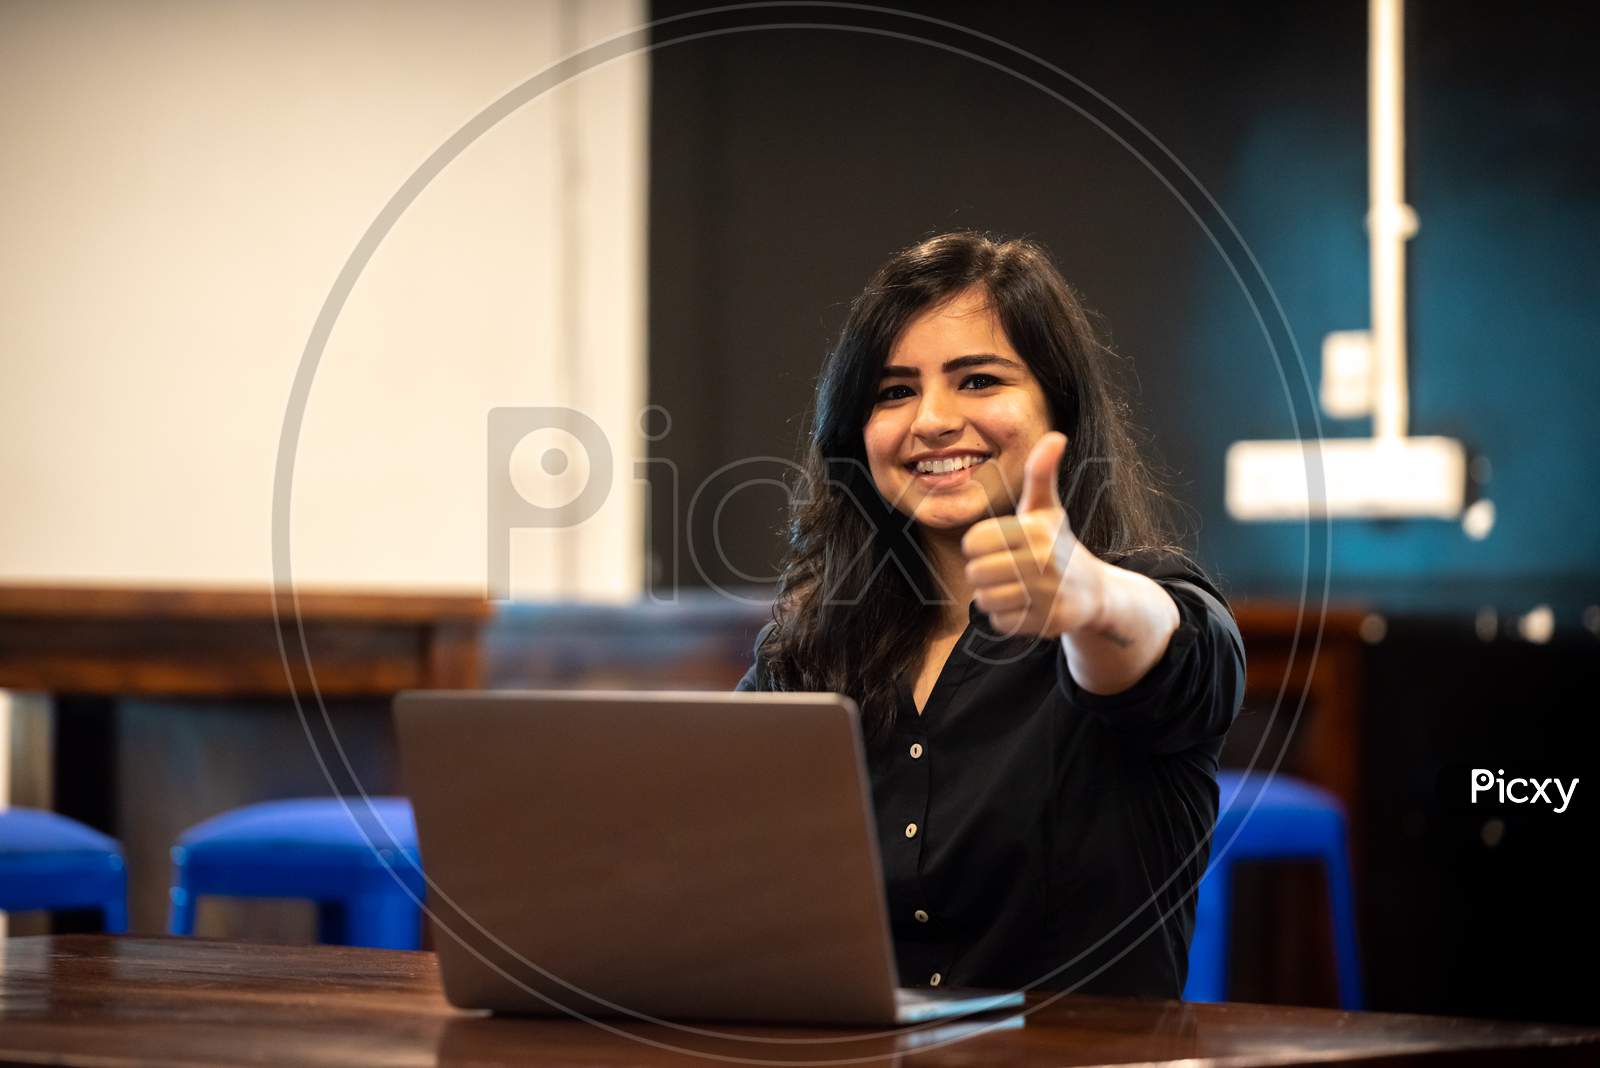 Smiling Young Indian woman showing thumbs up gesture as she works on a Laptop